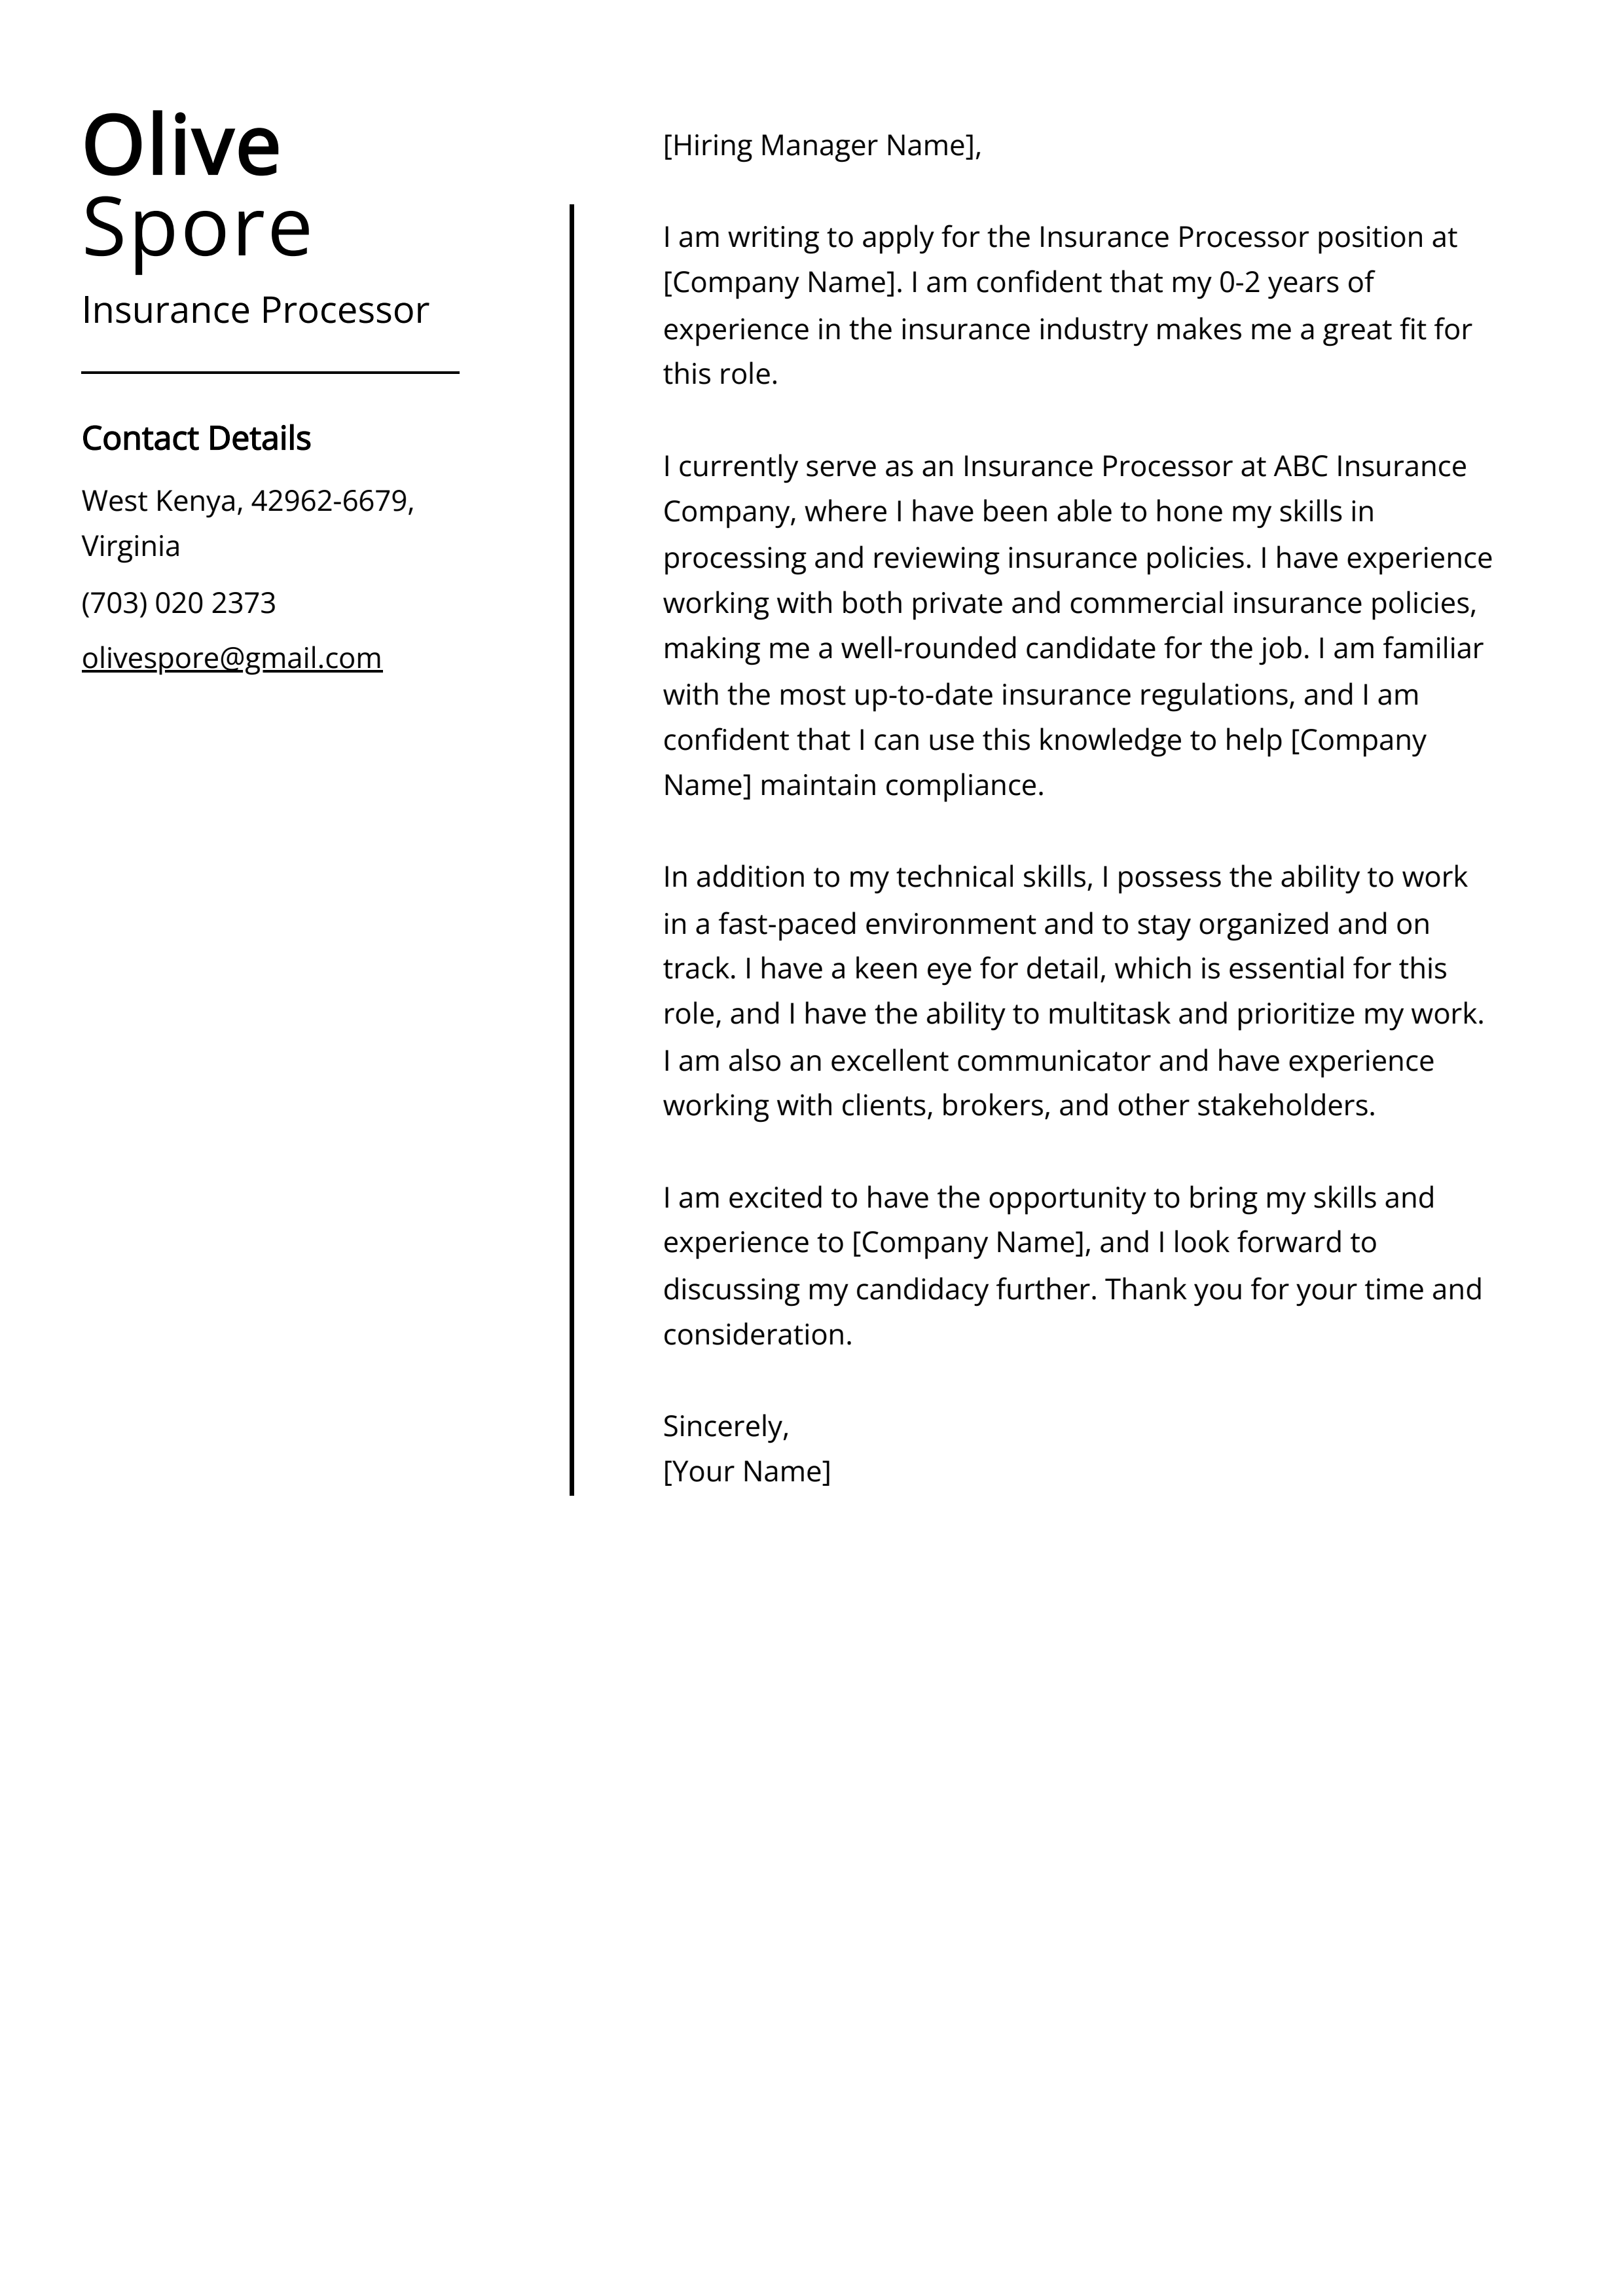 Insurance Processor Cover Letter Example